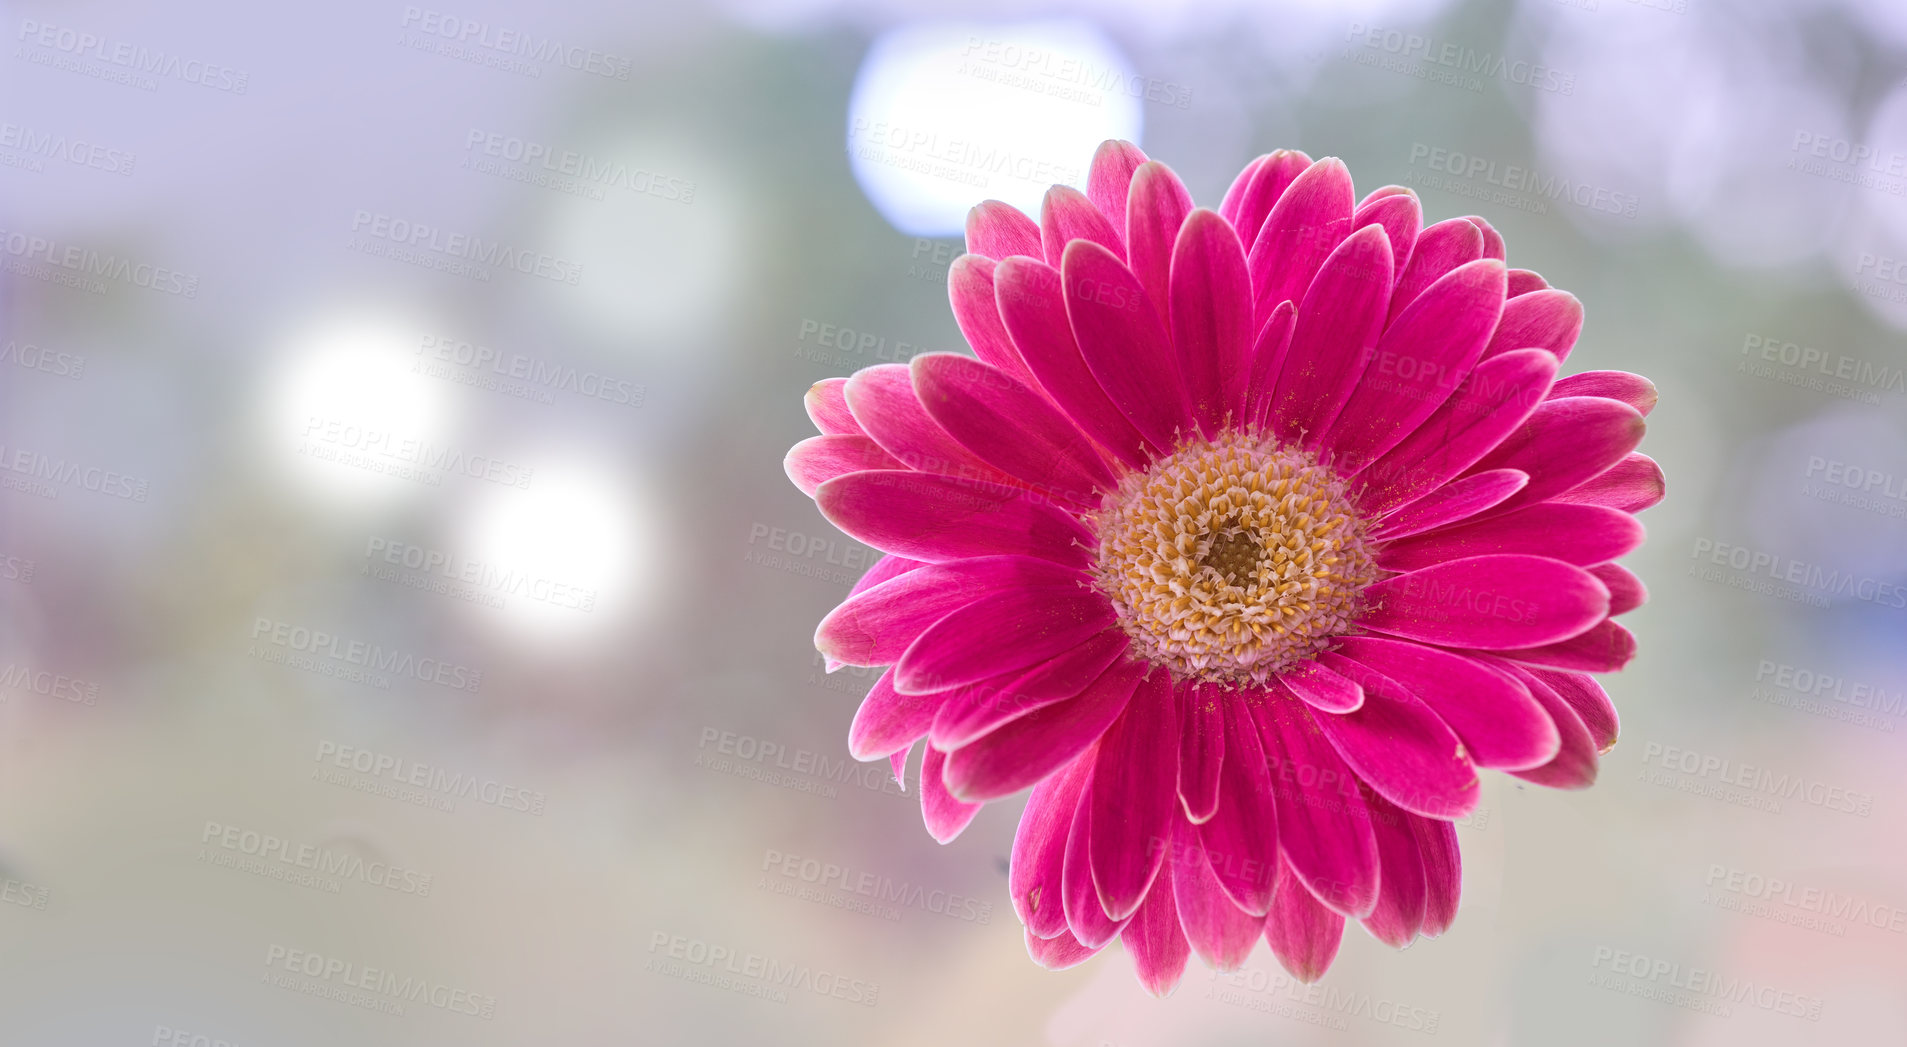 Buy stock photo Closeup of a pink daisy flower isolated against a bokeh copy space background. Marguerite daisies growing in a remote field, meadow, home backyard garden. Textured detail of argyranthemum frutescens